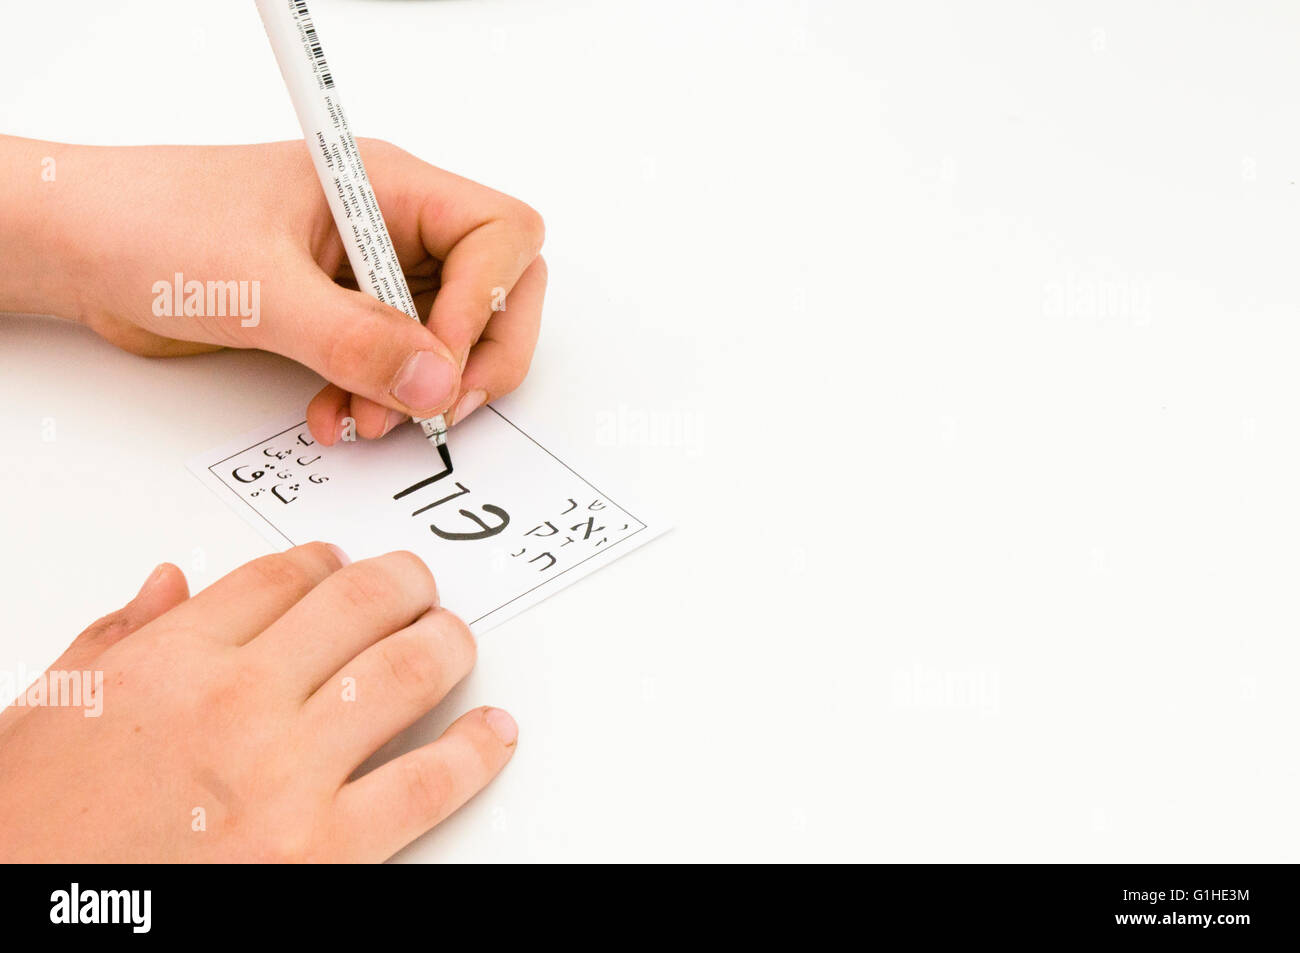 Arabic, Hebrew, Jewish, alphabet, characters, letters, child, left handed writing Stock Photo